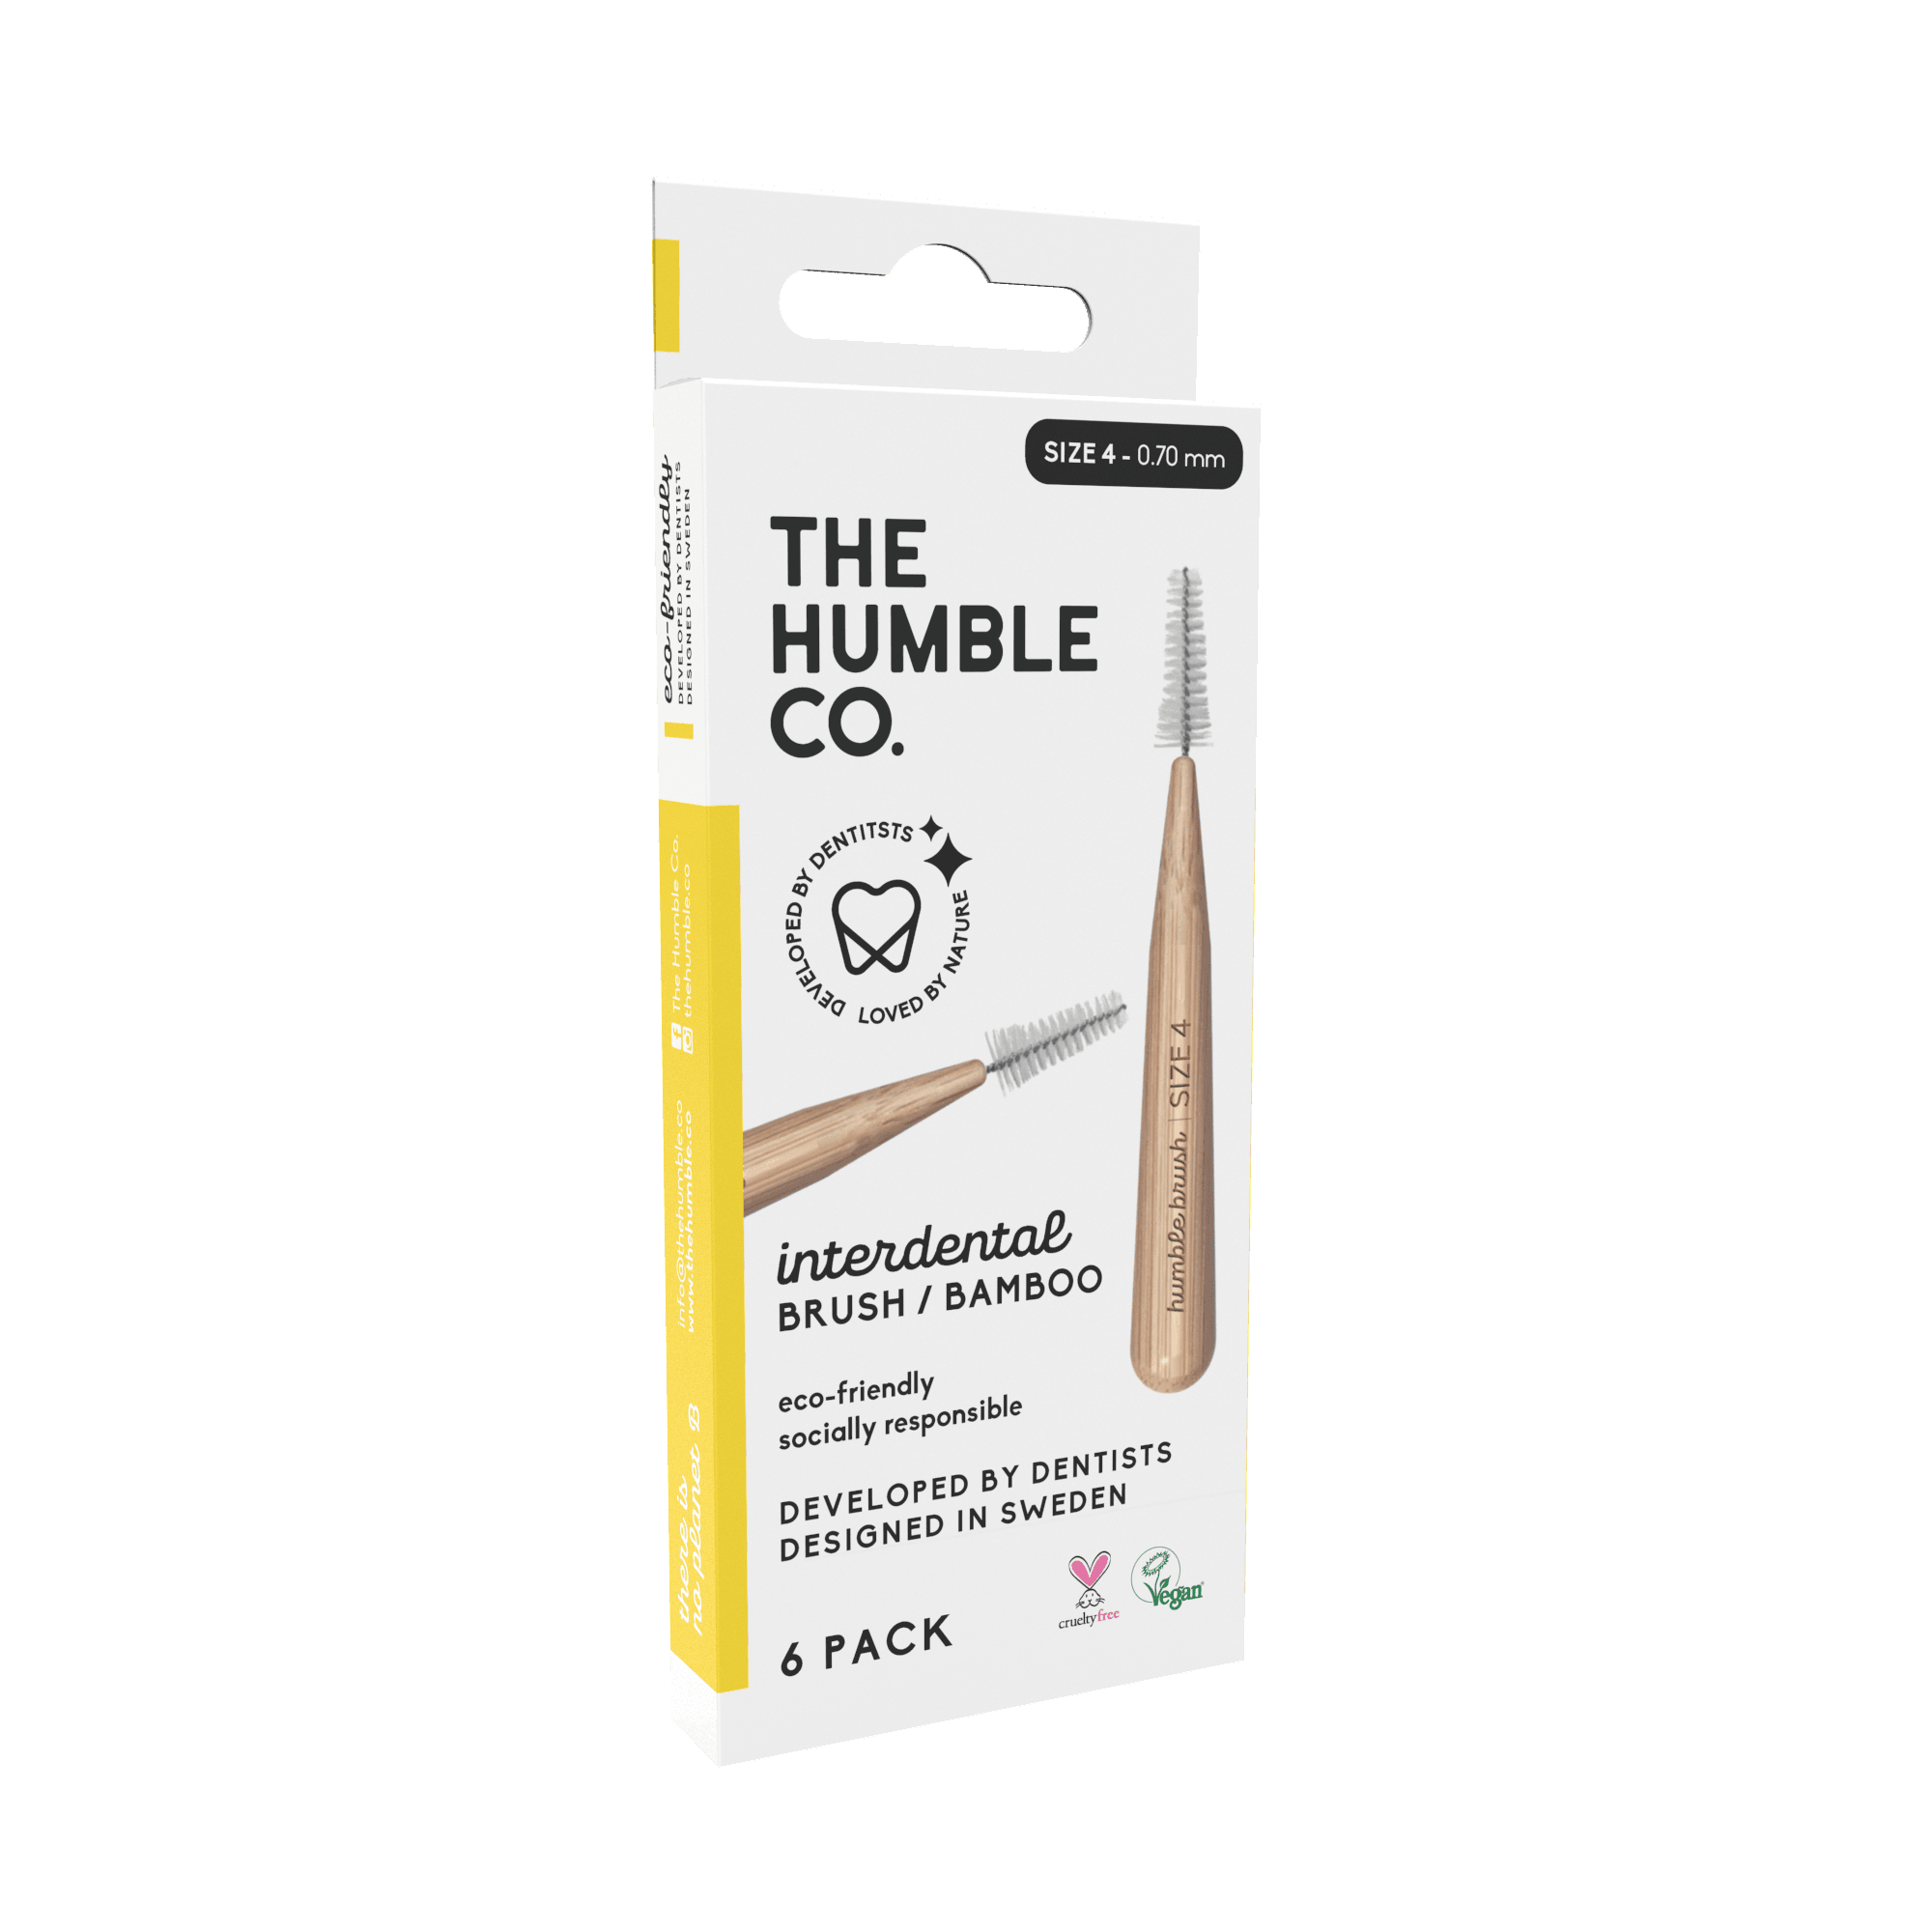 The Humble Co Interdental Brush Bamboo - size 4